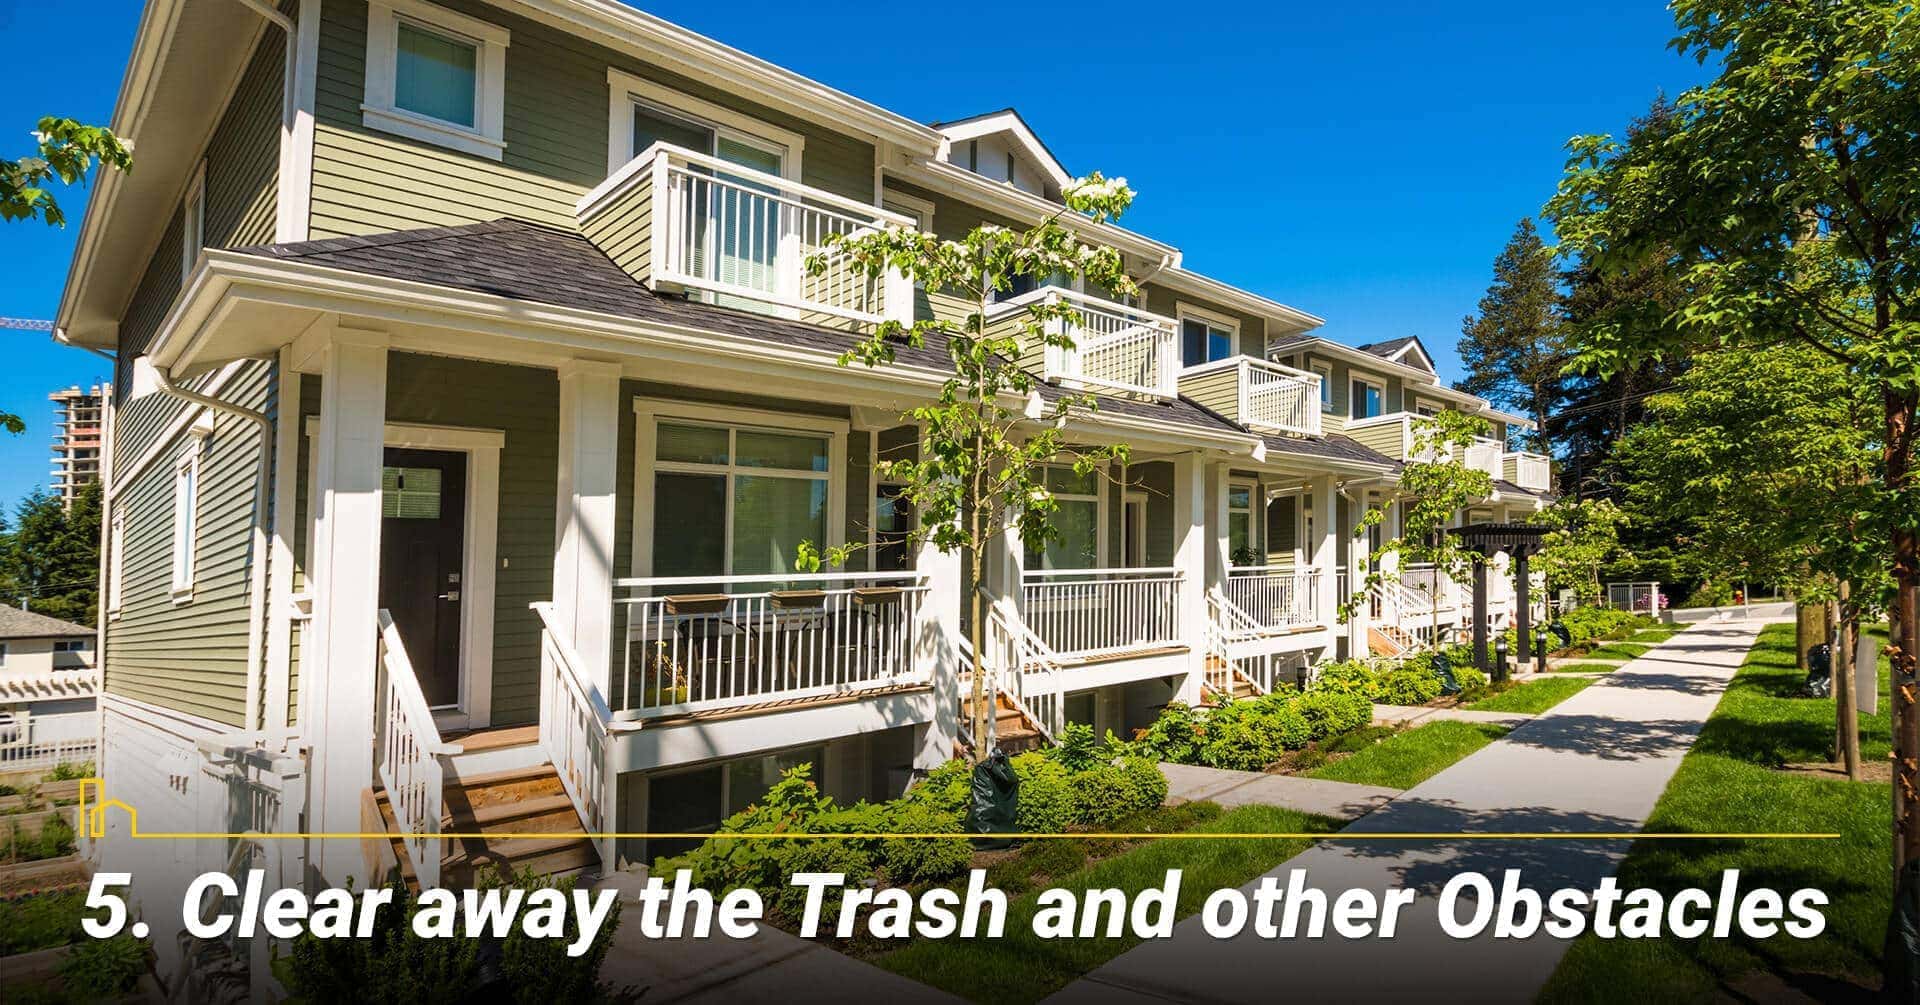 Clear away the Trash and other Obstacles, keep the property clear of obstructions